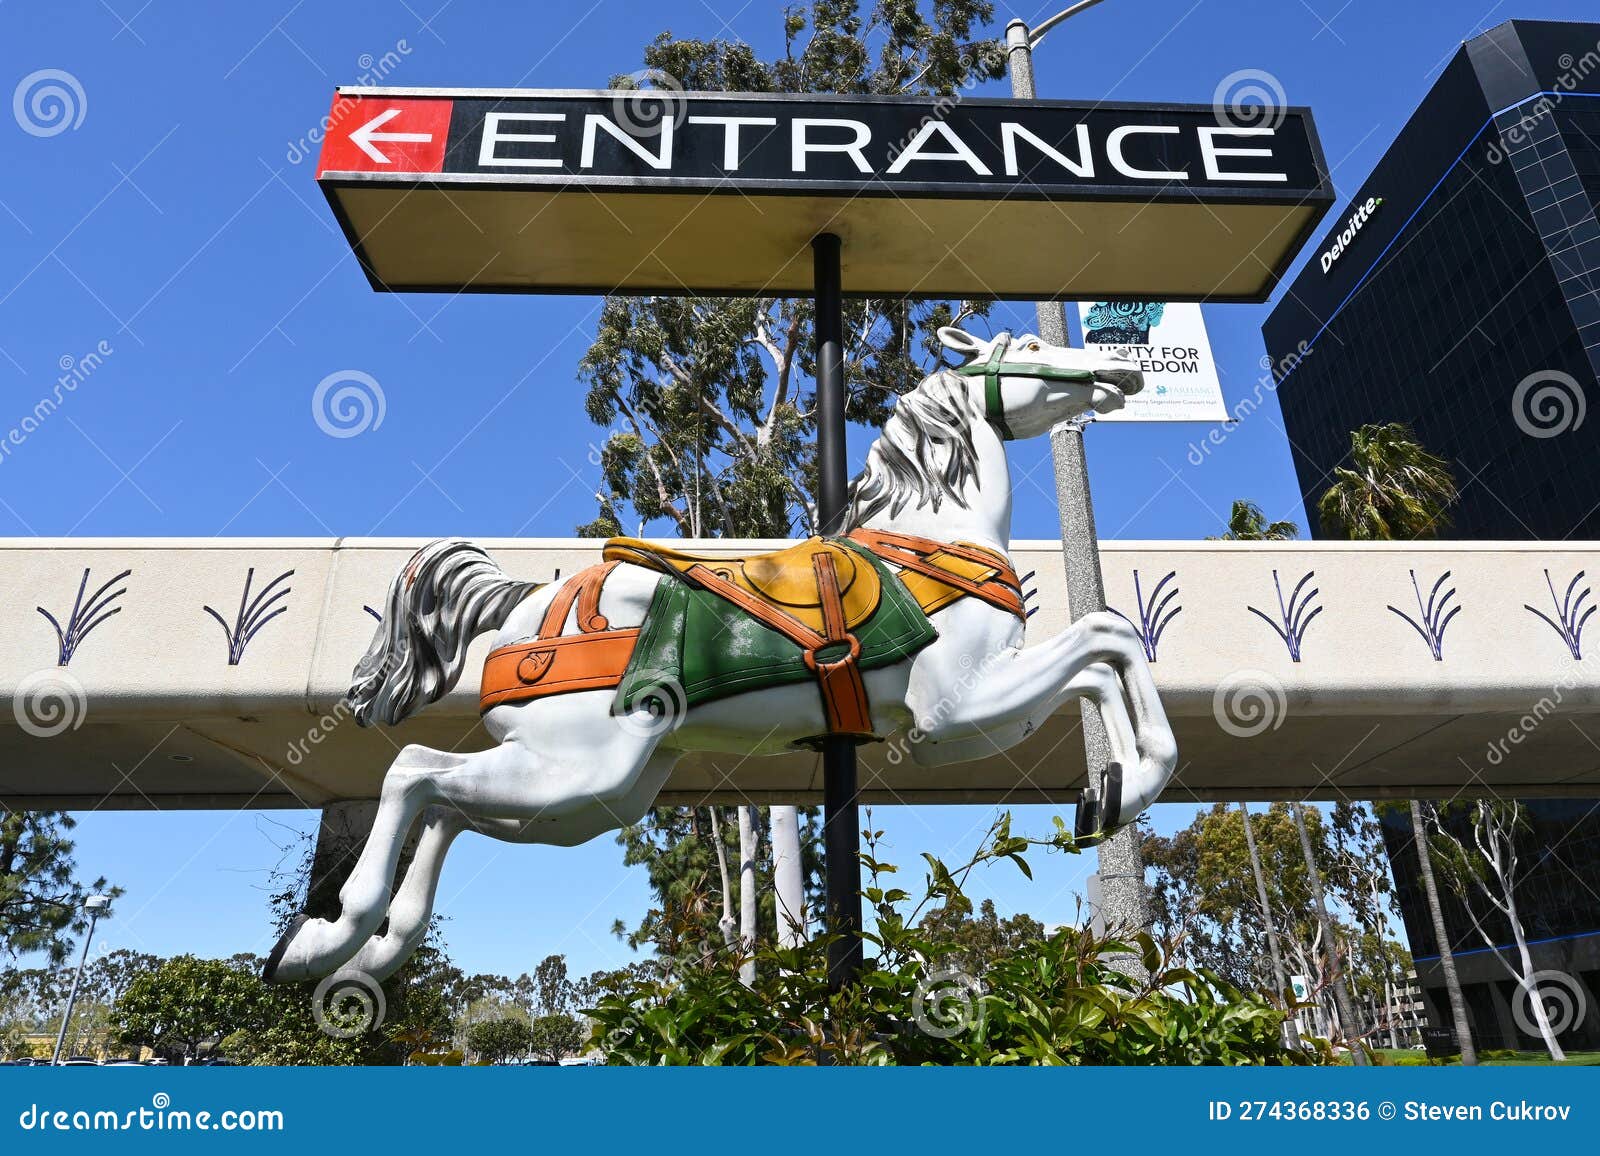 68 South Coast Plaza Mall Images, Stock Photos, 3D objects, & Vectors